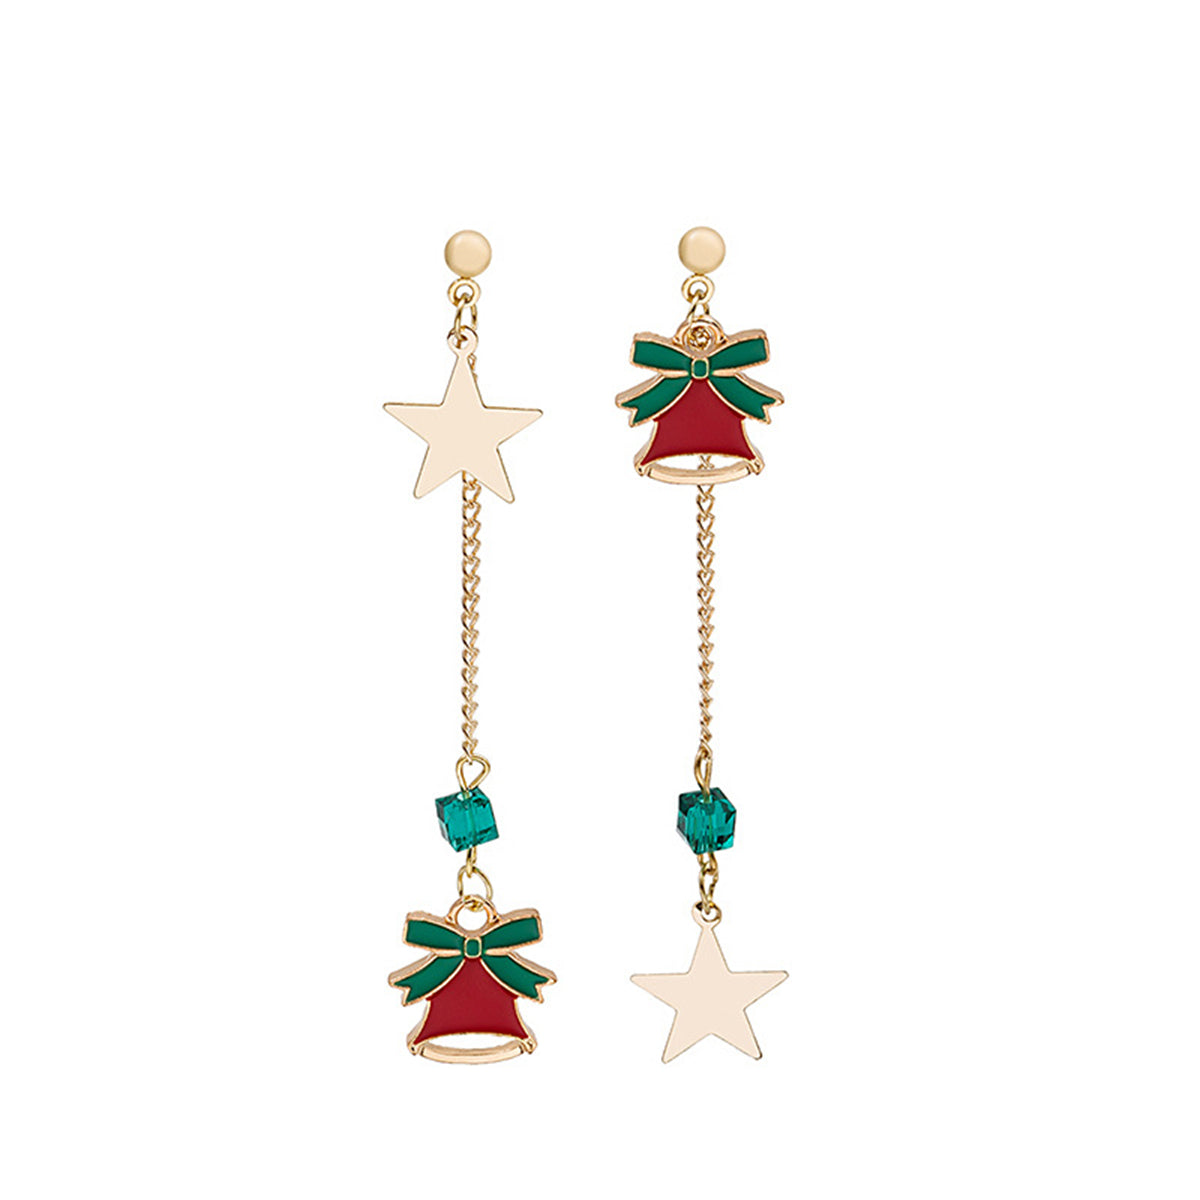 Red Enamel & Acrylic 18K Gold-Plated Star & Bell Mismatched Drop Earrings